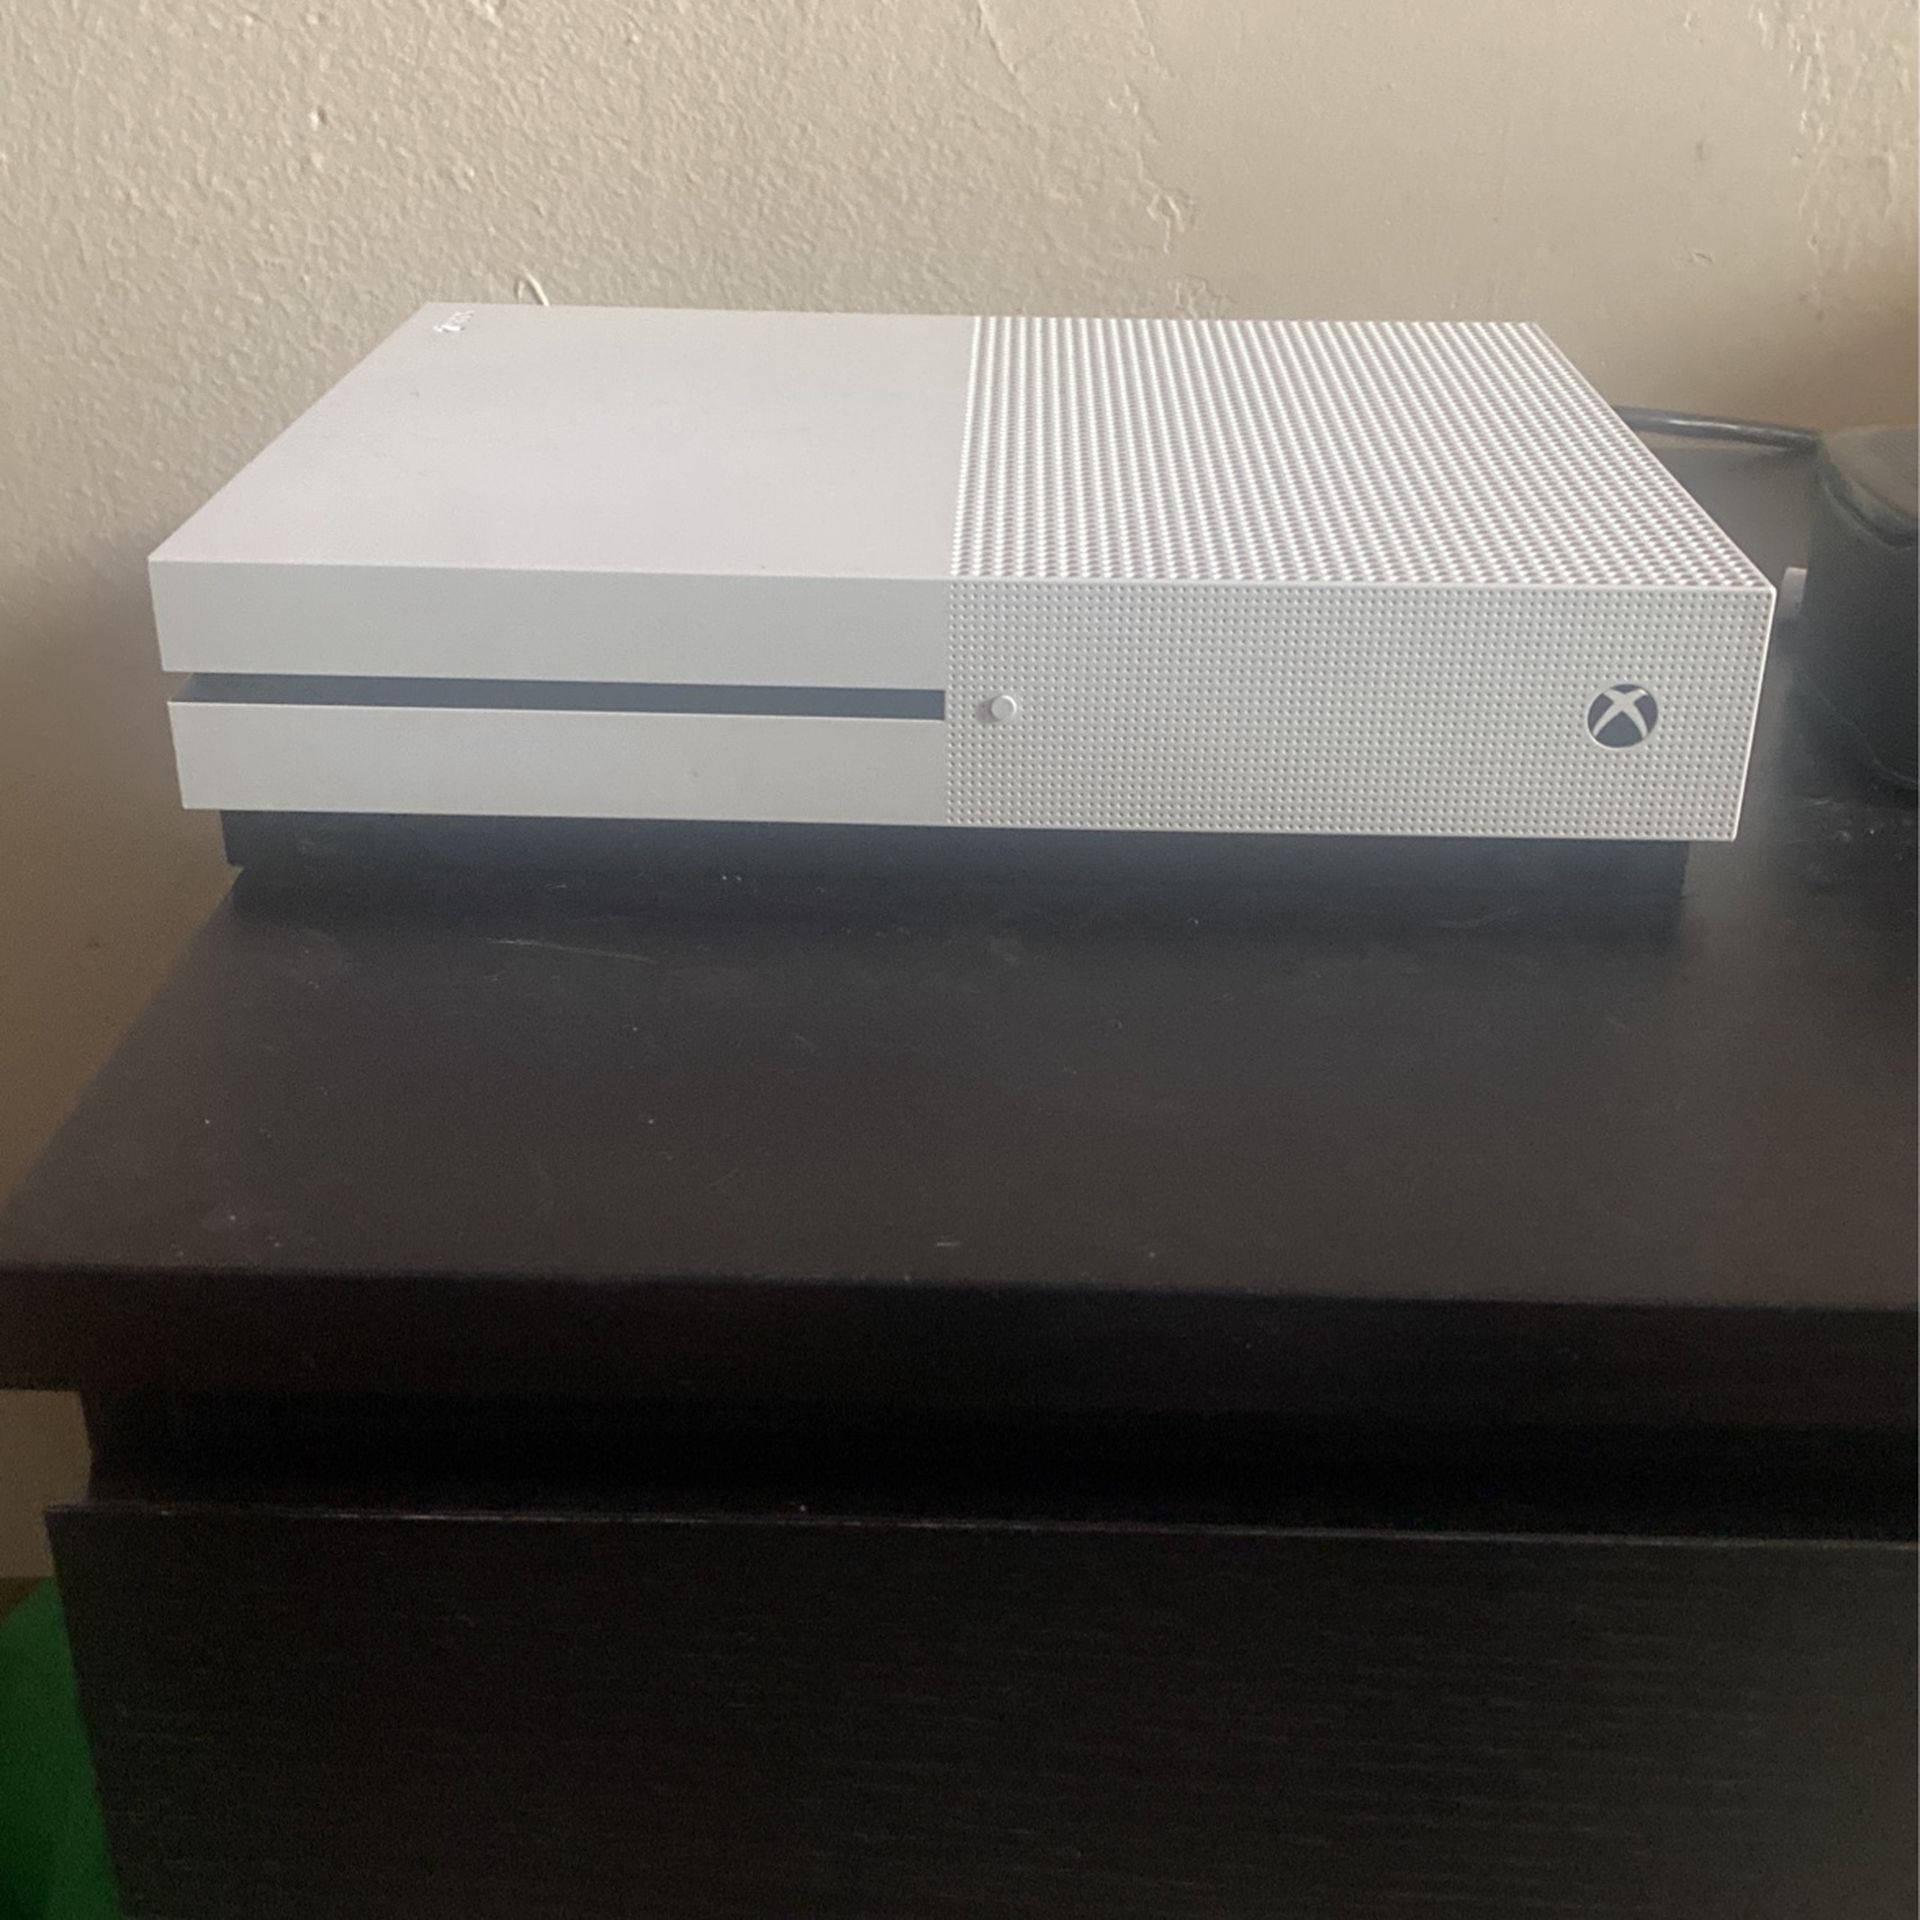 Xbox One S (BEST OFFER) comes with games and controller